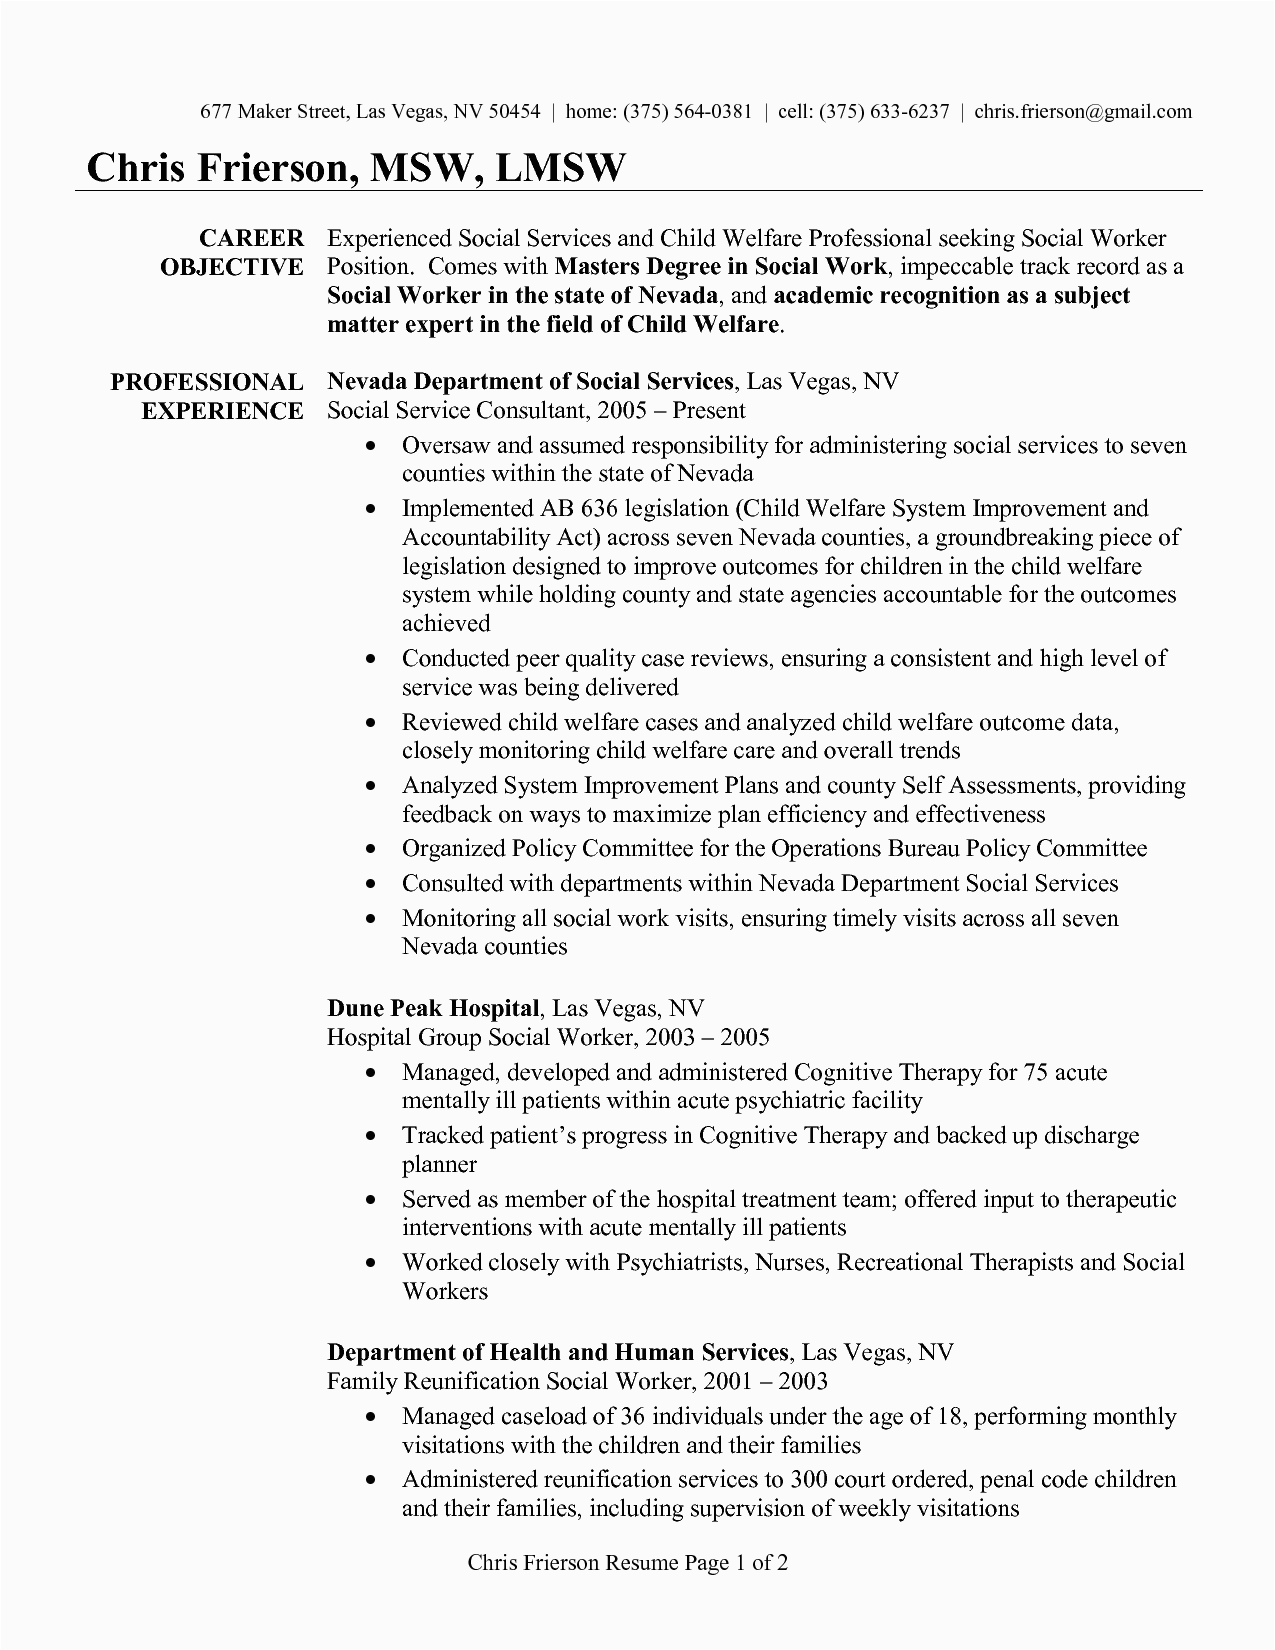 Social Service Worker Student Resume Sample Pin On Projects to Try